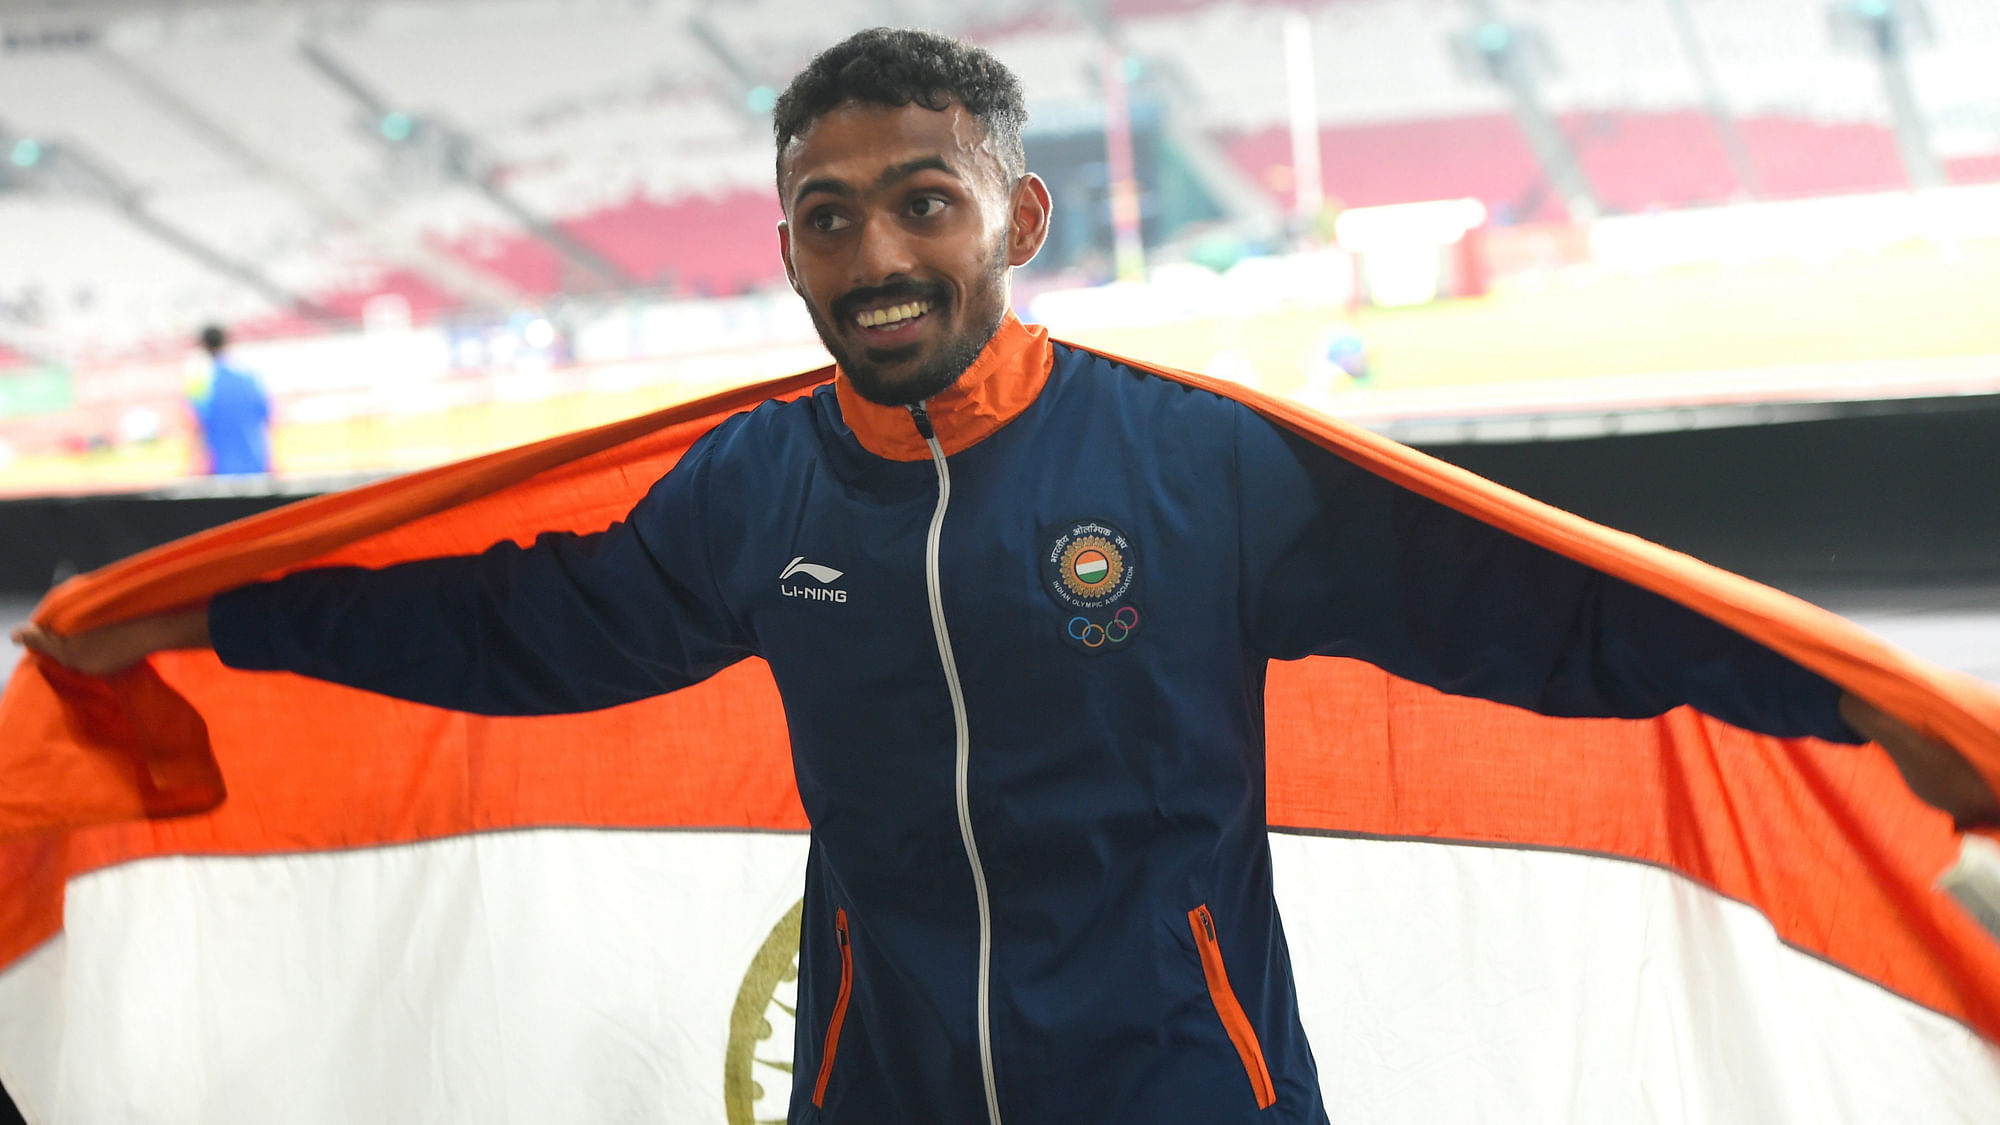 Indian athlete Yahiya Muhammed Anas holds the Indian tricolour after securing silver in men’s 400m final athletics event at the 18th Asian Games 2018 in Jakarta, Indonesia.